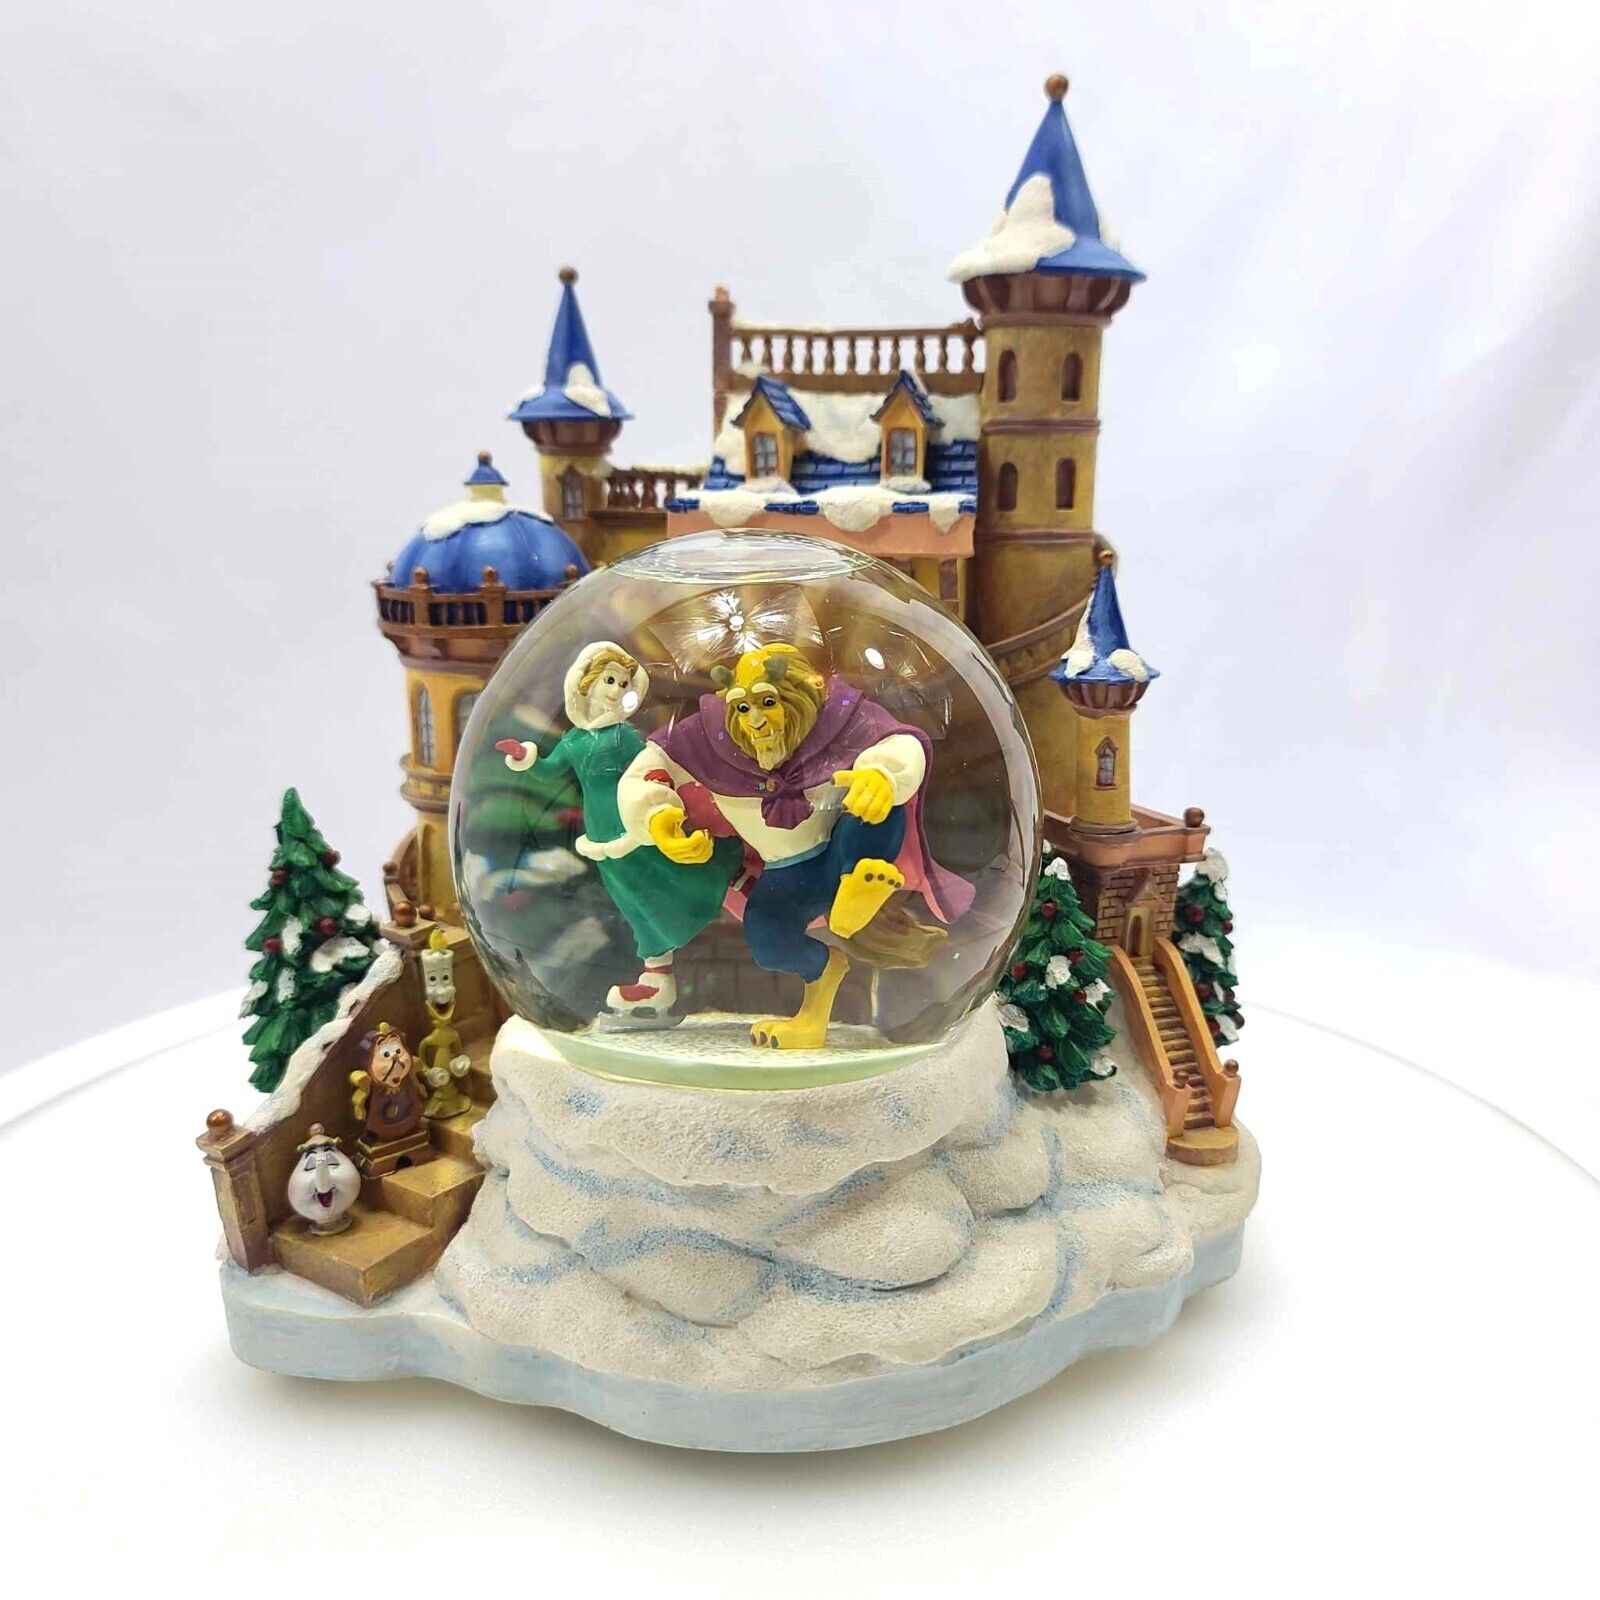 VINTAGE Disney Beauty and the Beast Ice Skating Musical Snow Globe - RETIRED